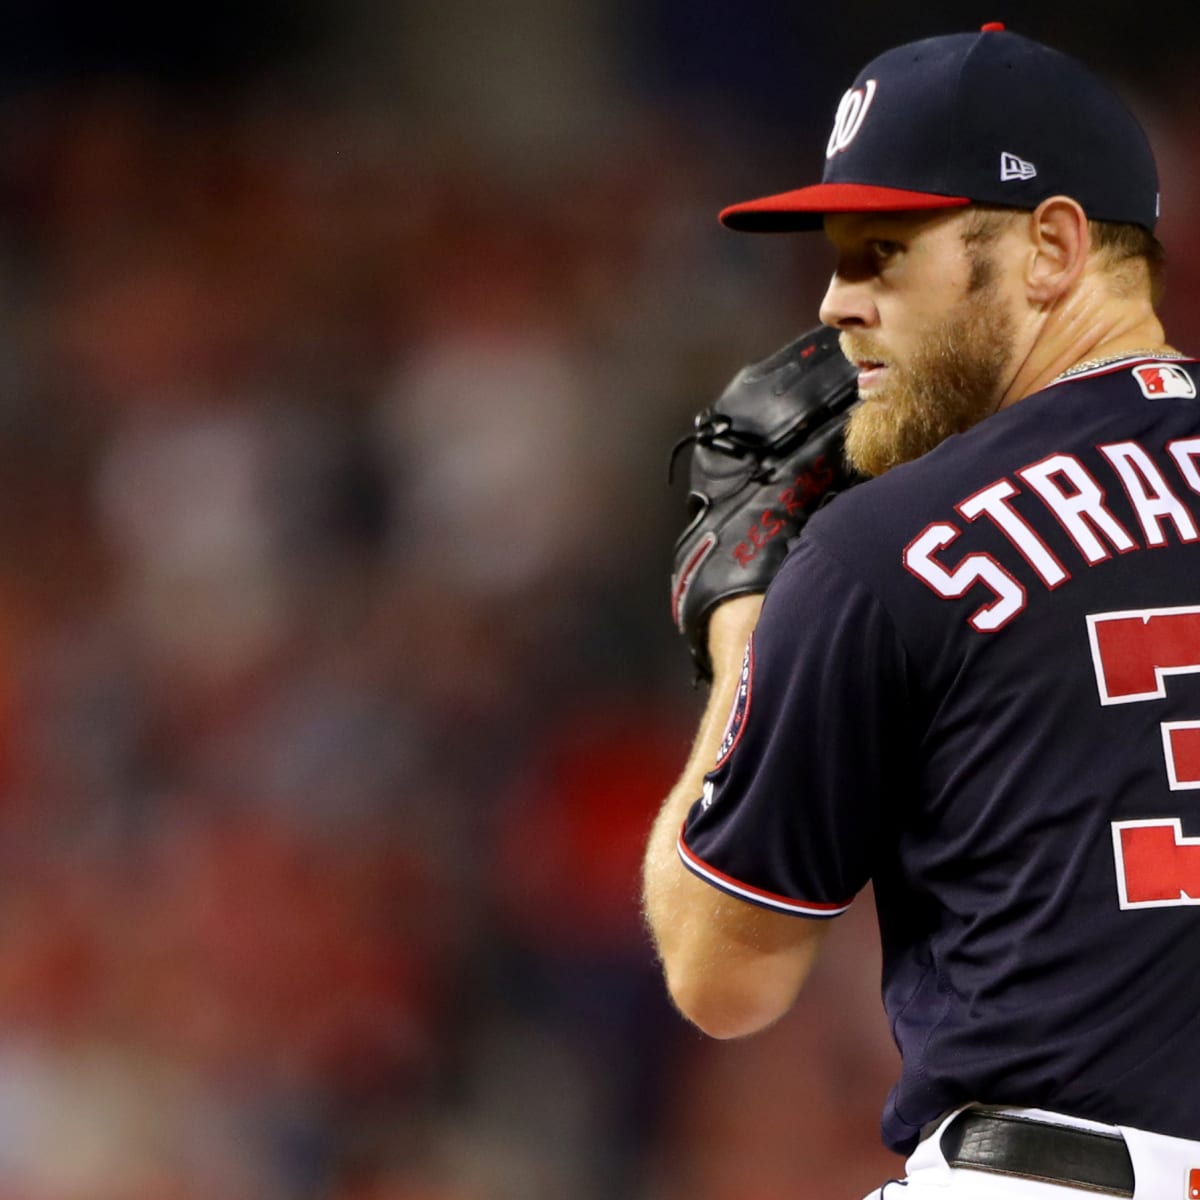 Strasburg gets the start against Miami, by Nationals Communications